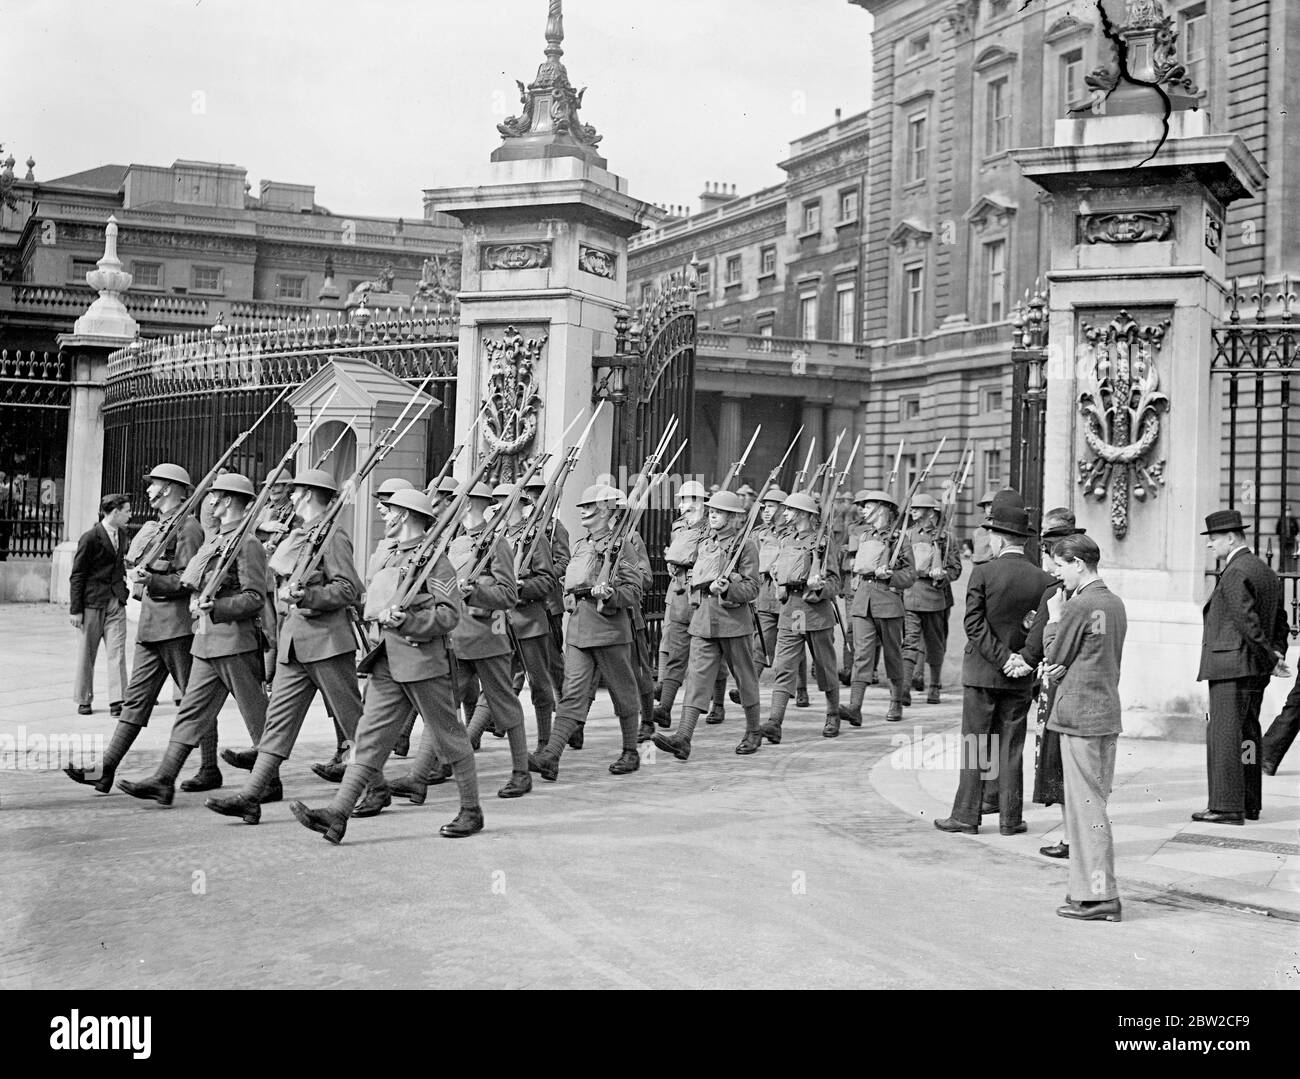 The guards wore steel helmets during the changing of the guard ceremony at Buckingham Palace. 2 September 1939 Stock Photo